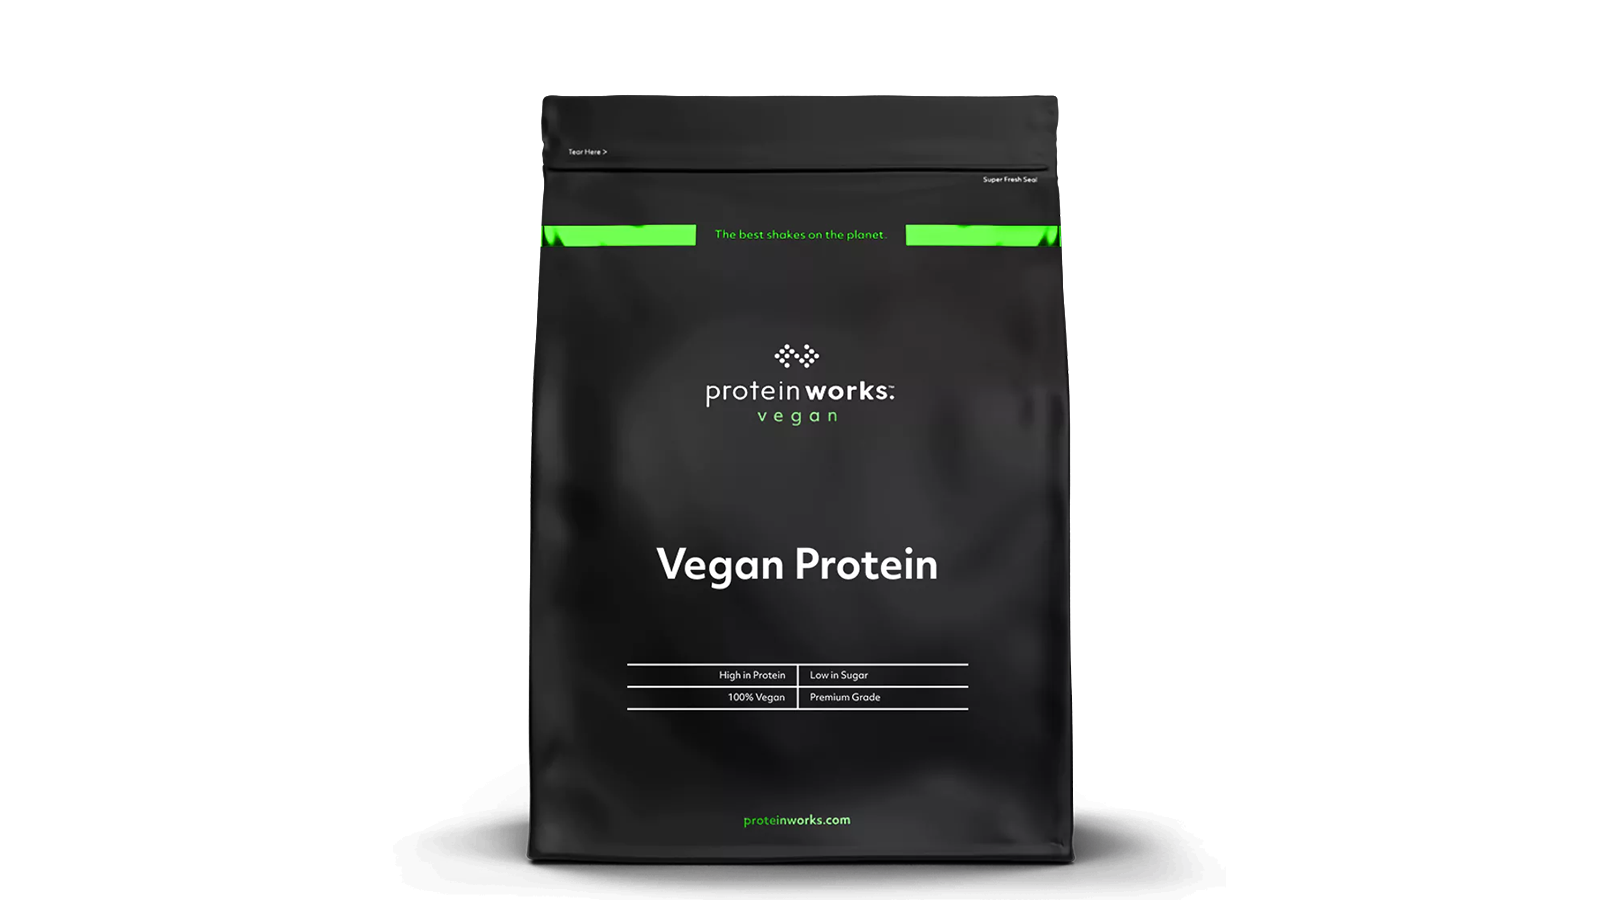 8. The Protein Works